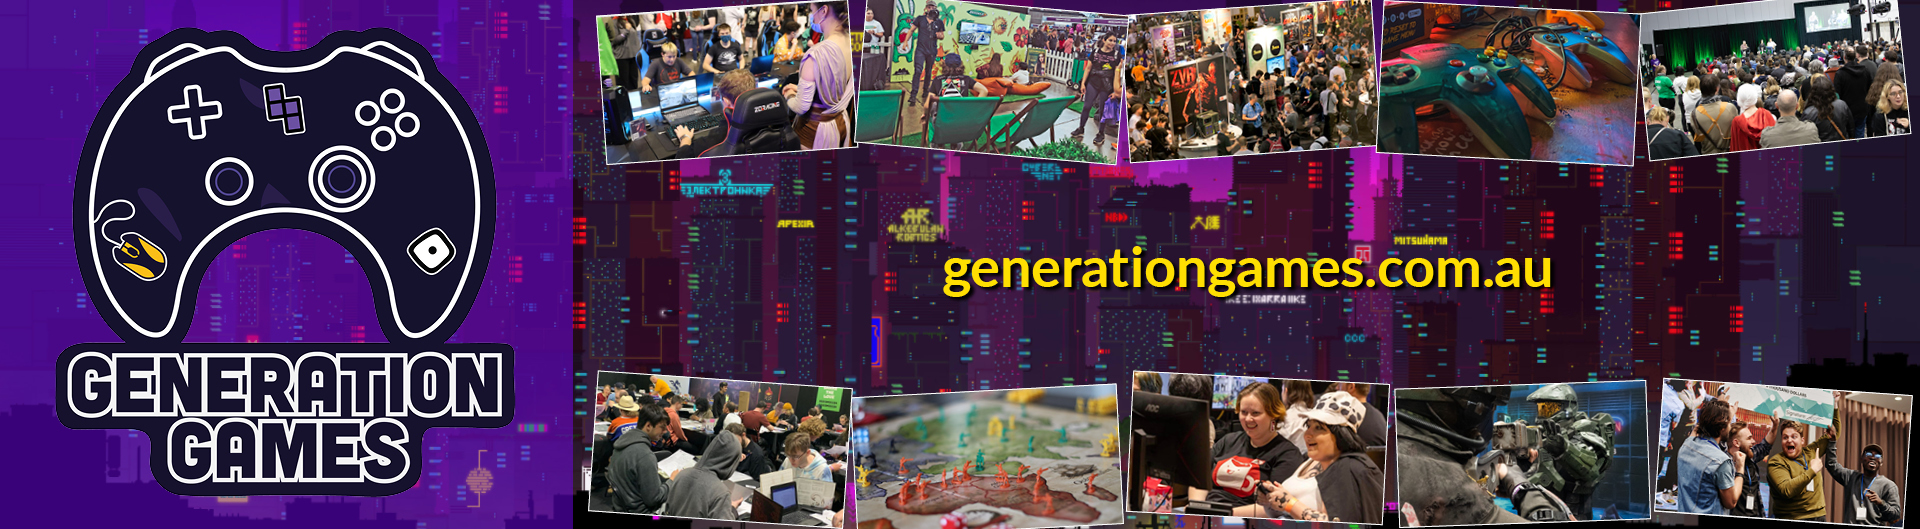 Generation Games is coming to ICC Sydney on 20 to 21 April 2024.